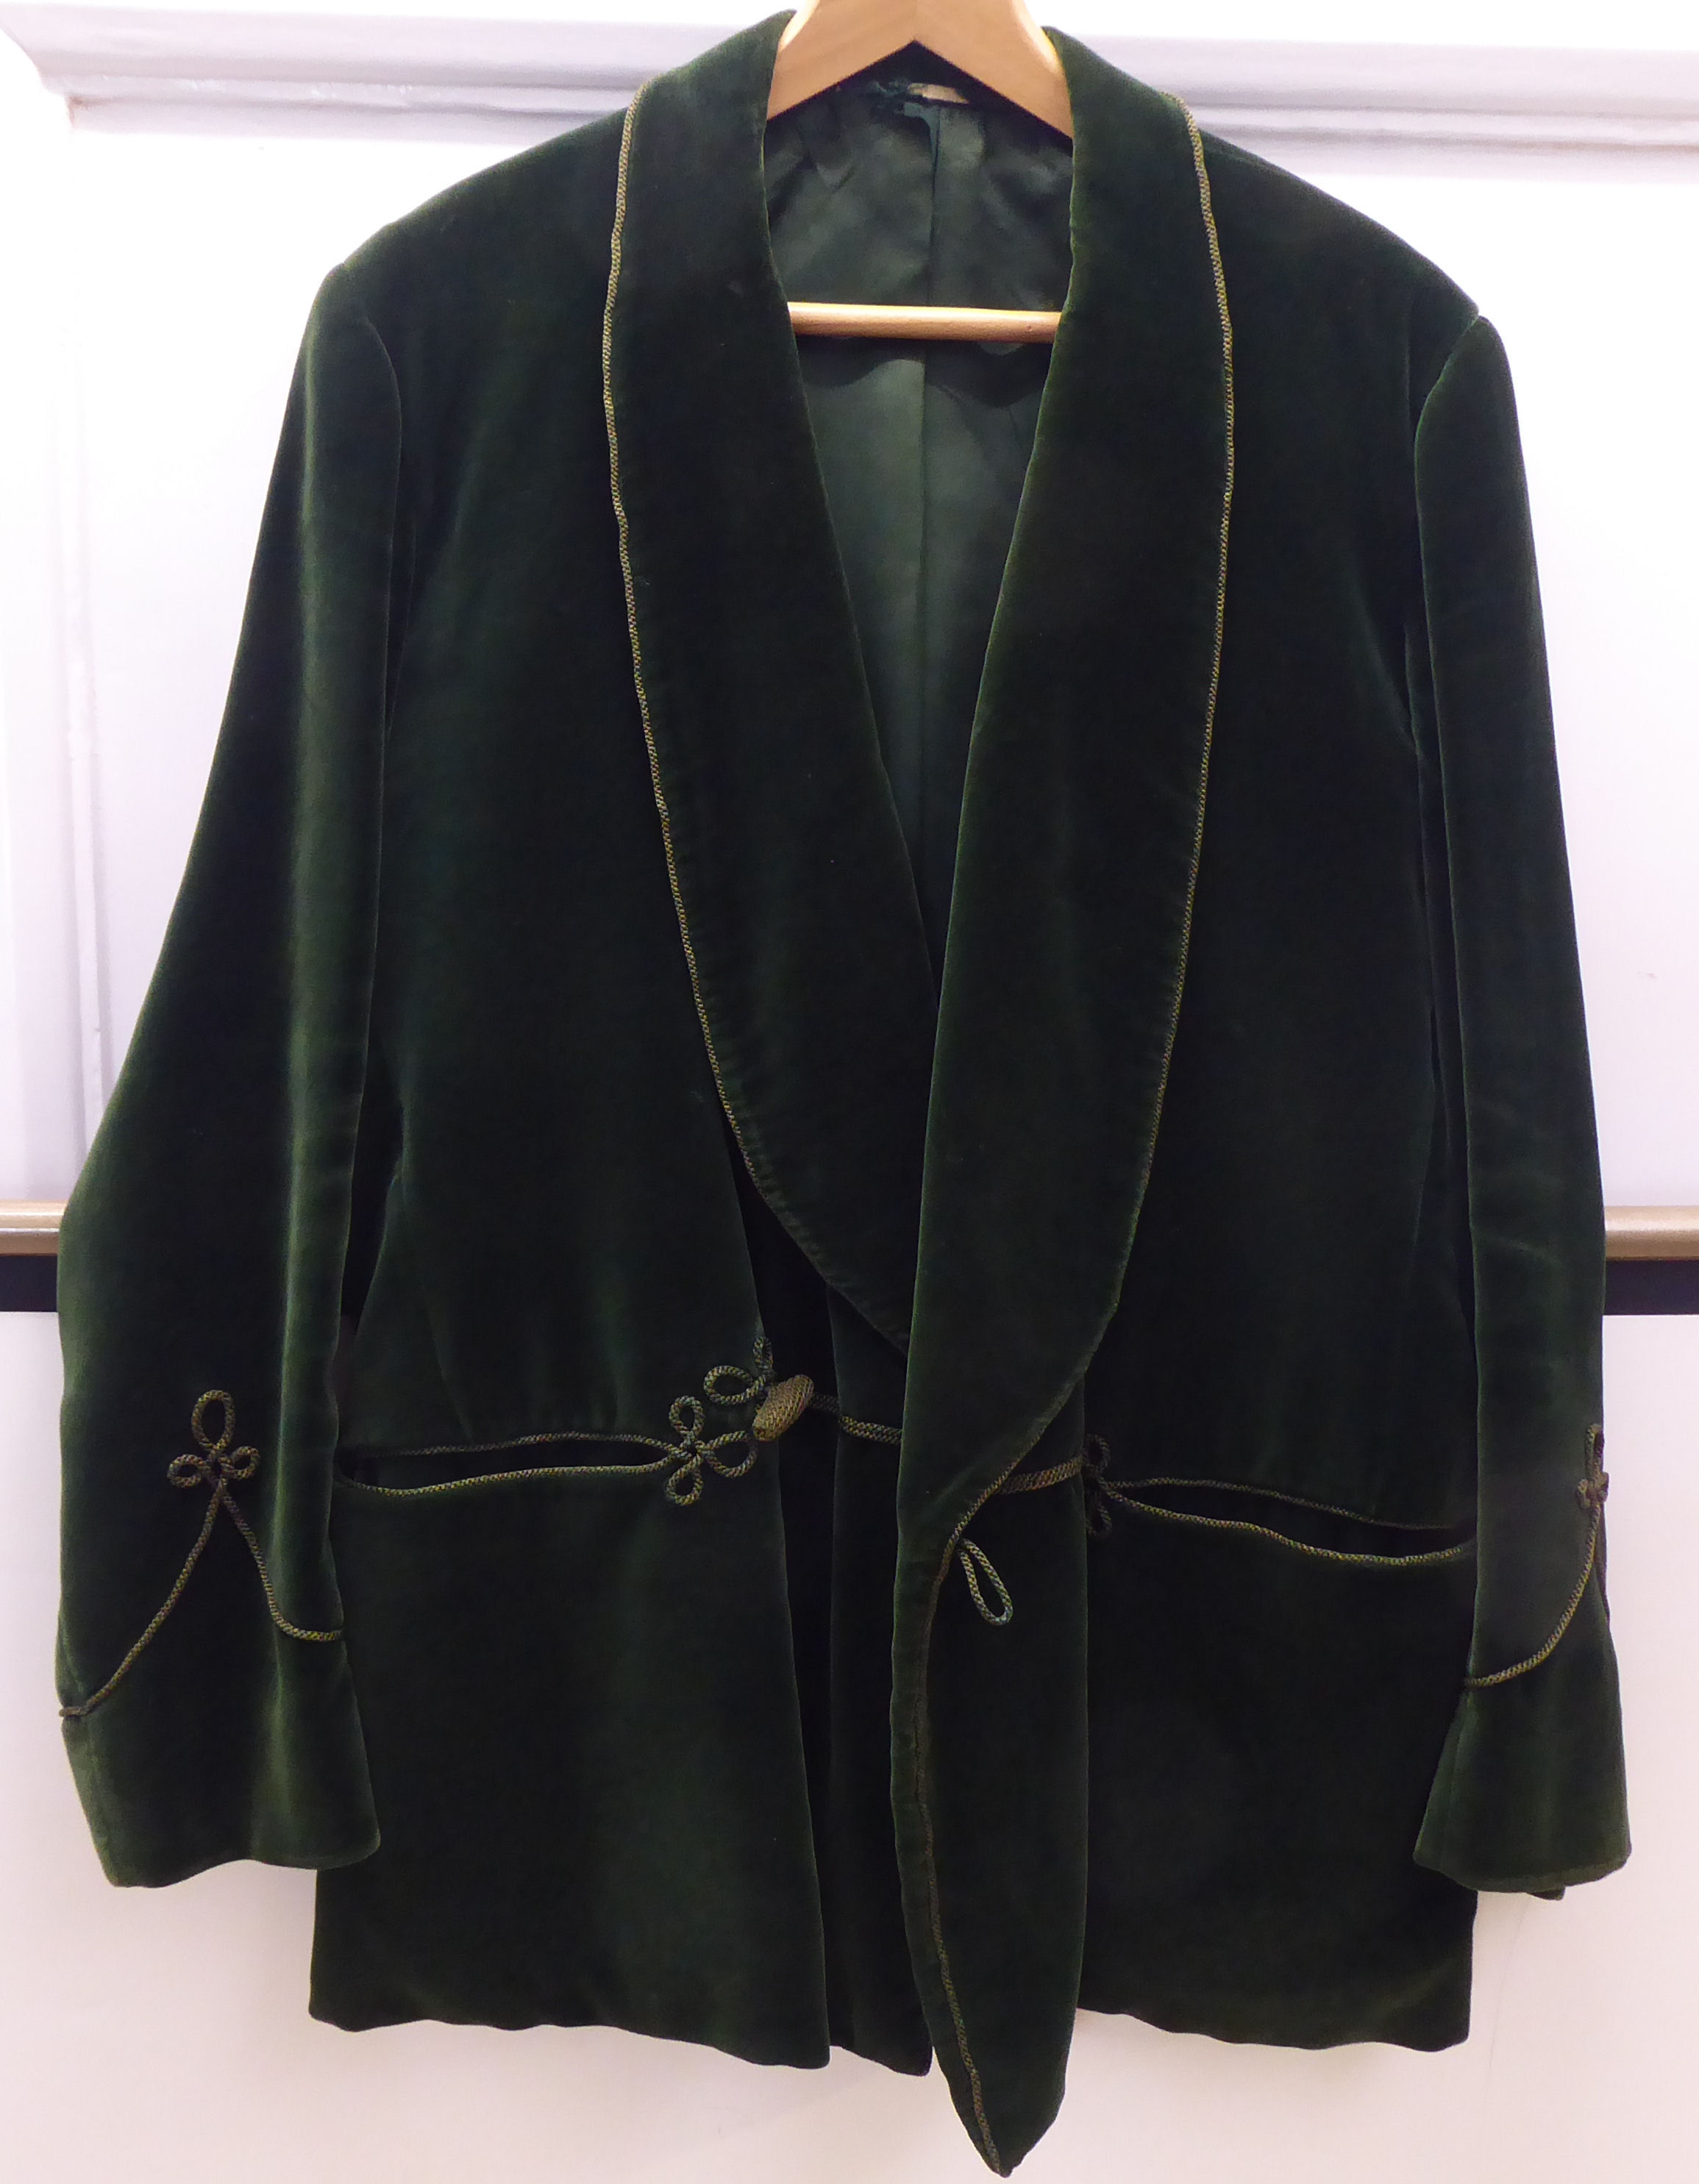 A circa 1930s crushed green velvet and silk lined smoking jacket  approx. size 40/42 regular